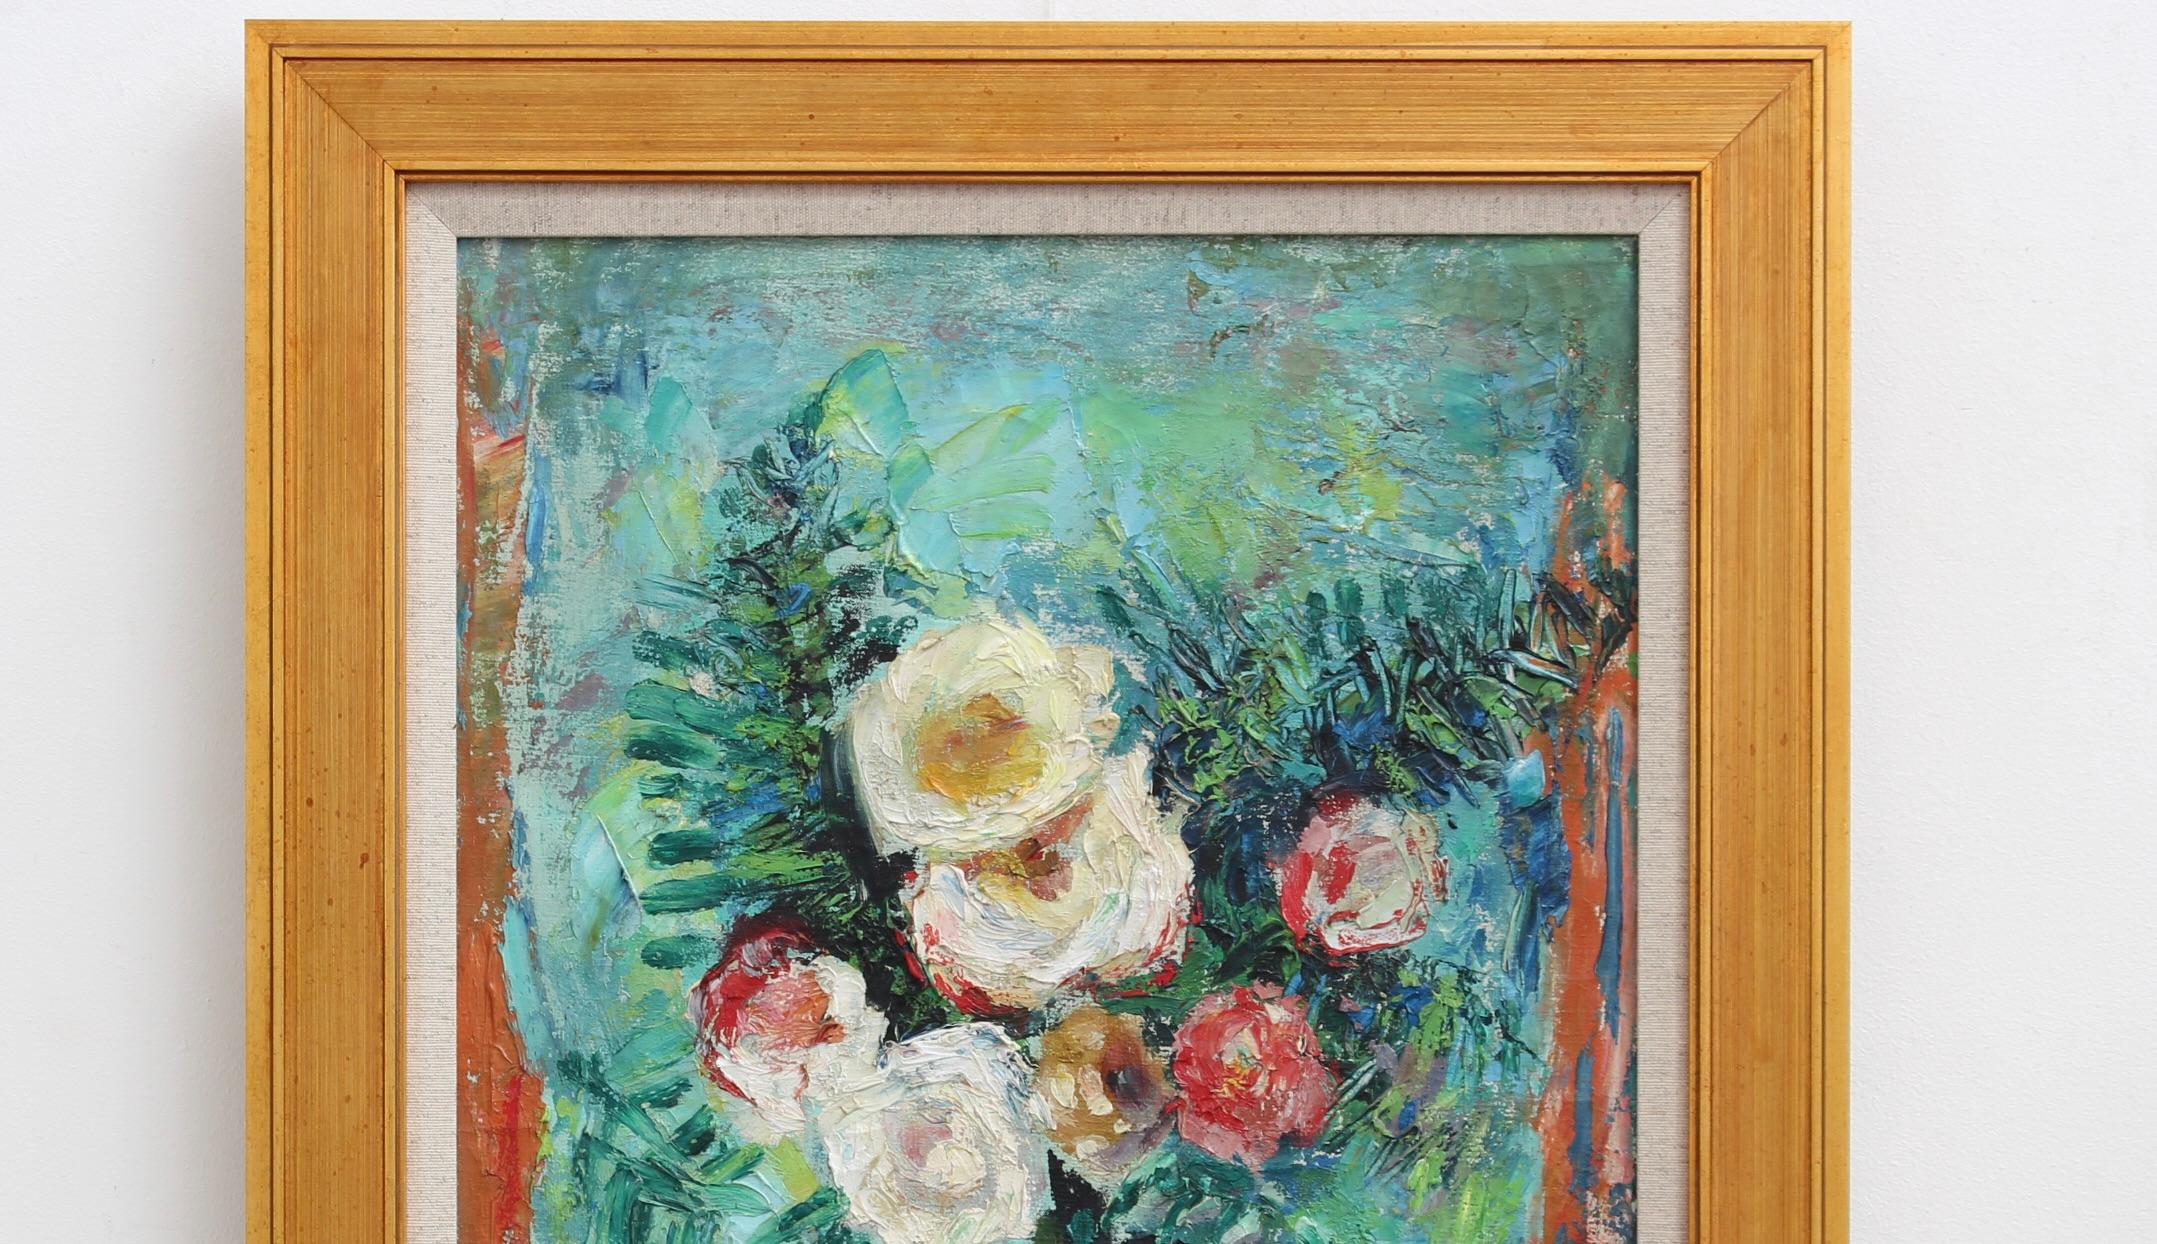 Bouquet of Flowers in a Pitcher - Impressionist Painting by Lilian E. Whitteker